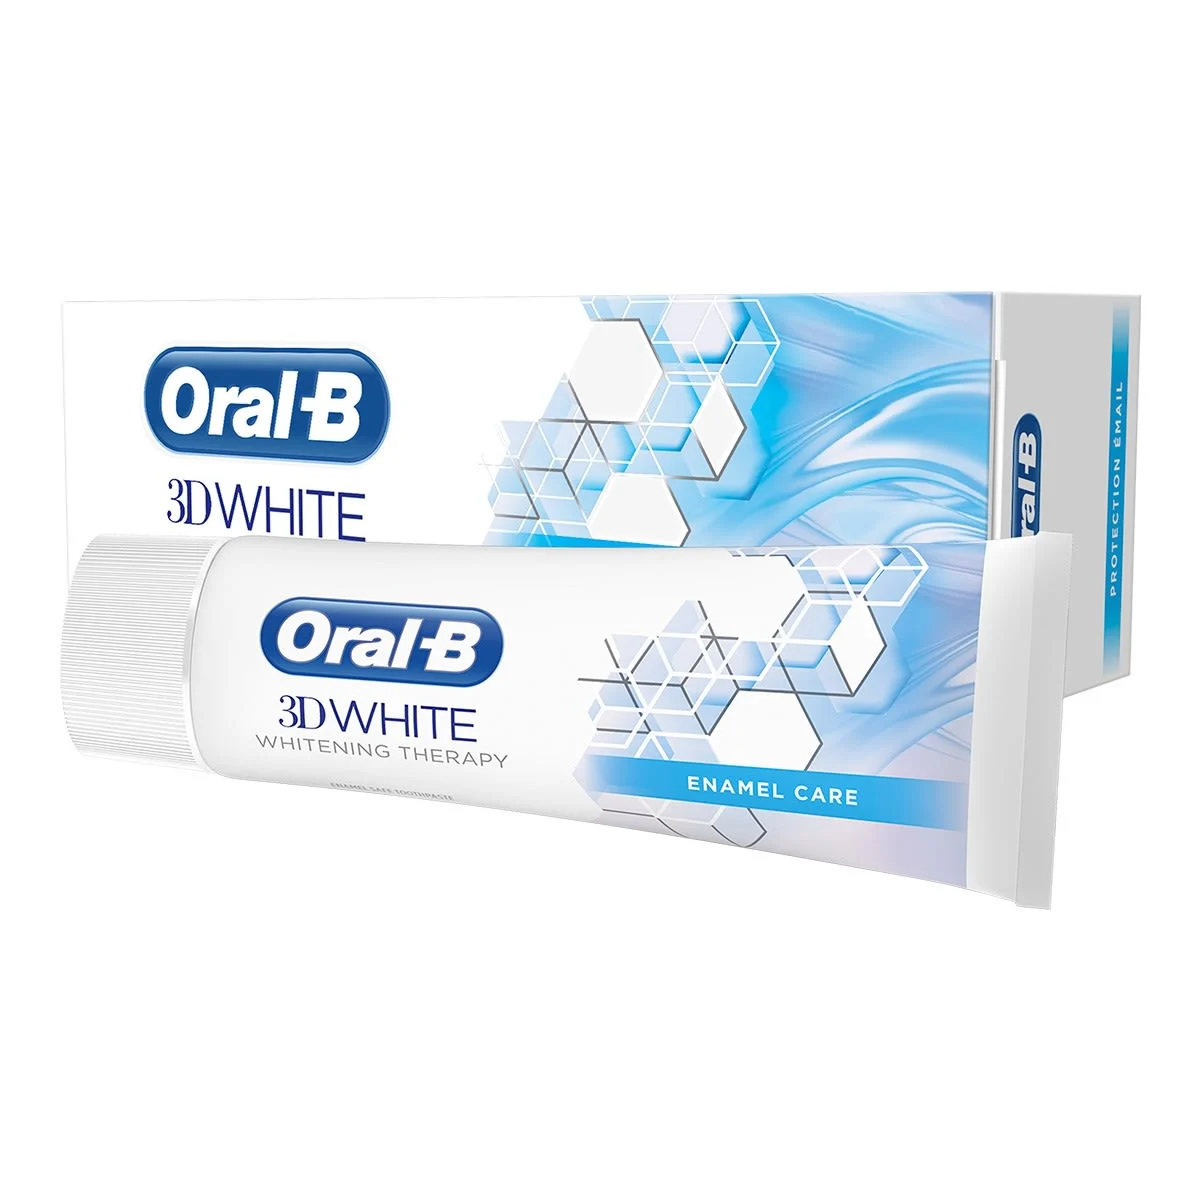 Oral-B 3D White Whitening Therapy Tandkräm 75 ml, Enamel Care undefined